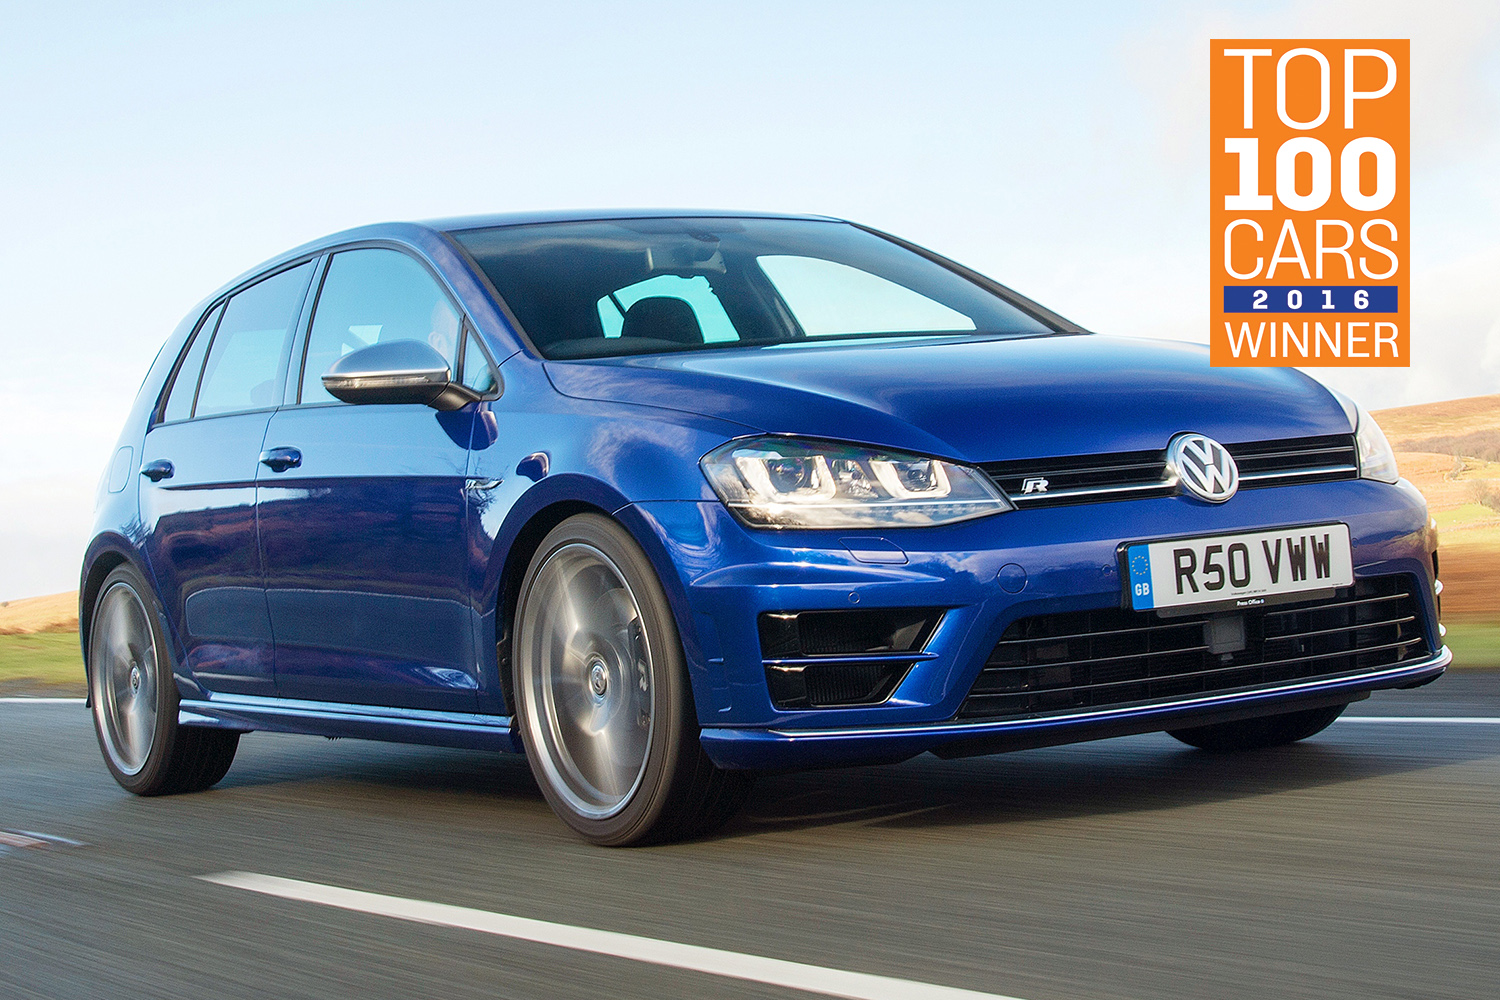 VW Golf R: The Sunday Times Top 100 Cars - Top 5 Hot hatches